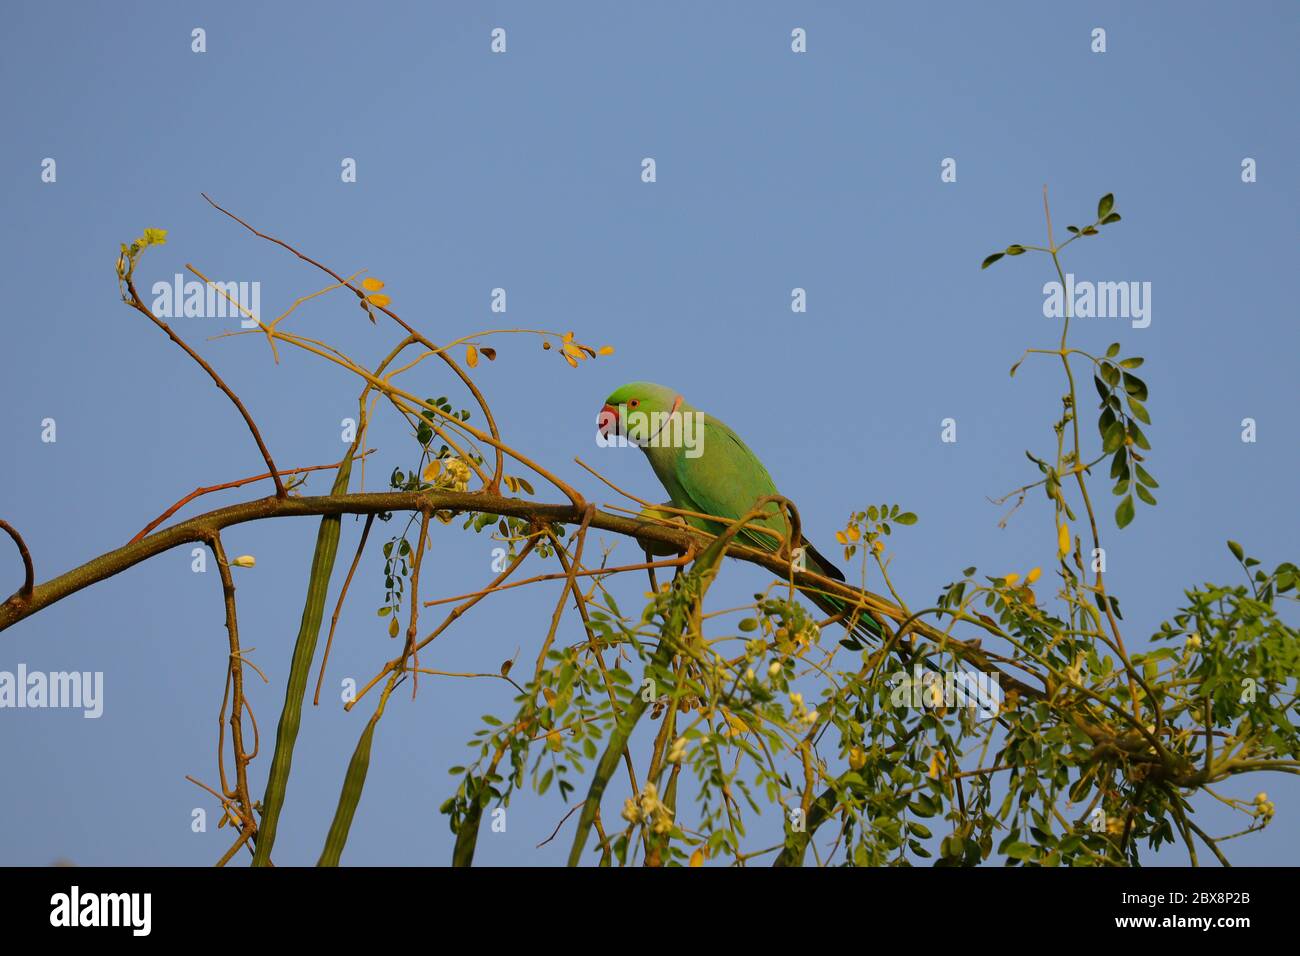 green parrot image , HD background, free bird background Stock Photo